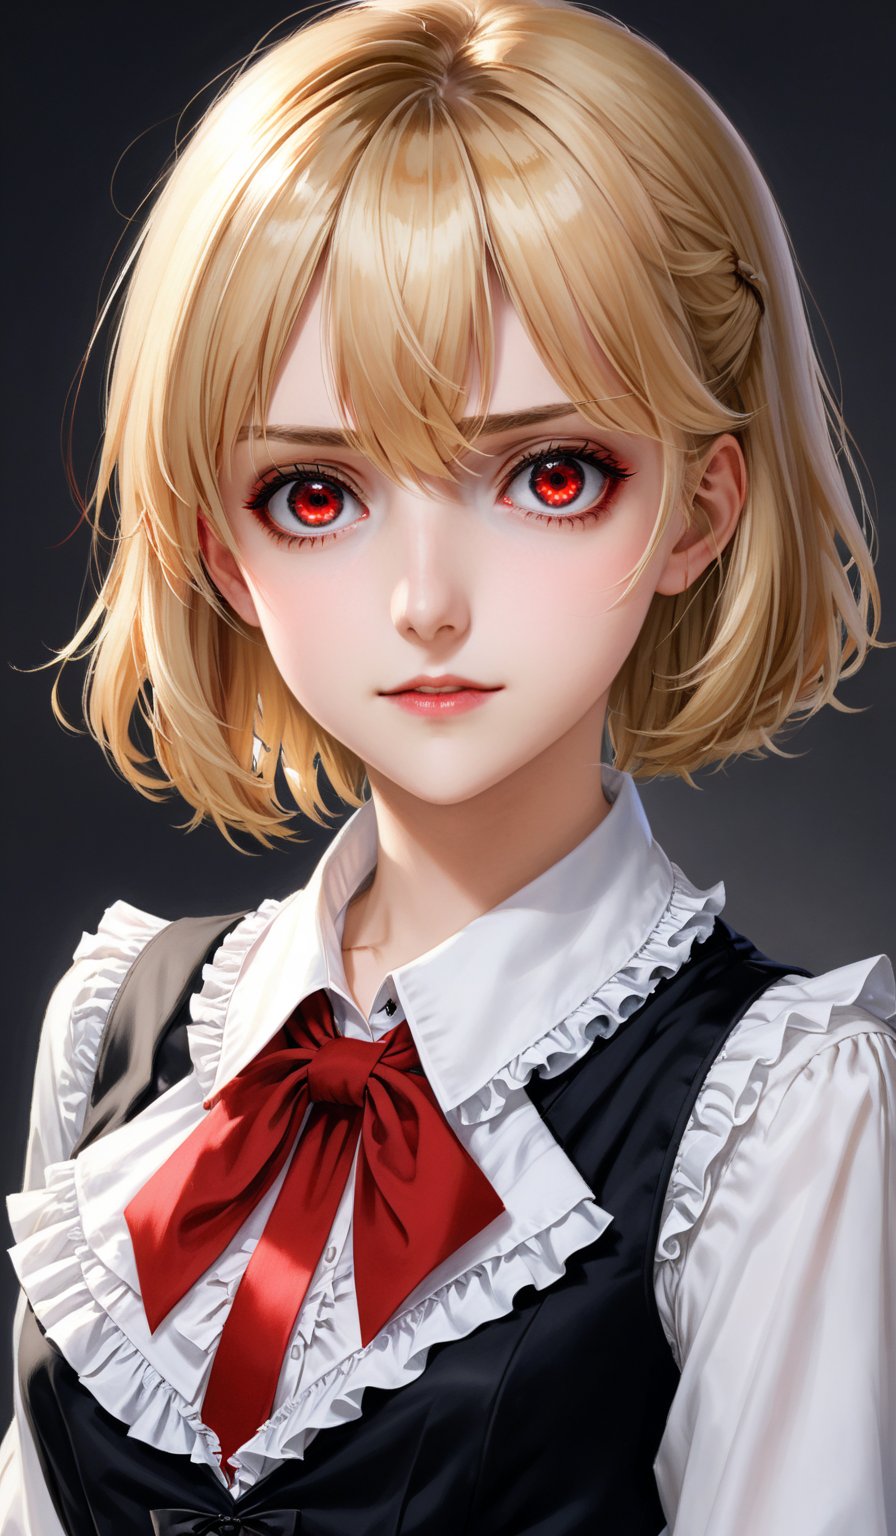 score_9, score_8_up, score_7_up, score_6_up, masterpiece,best quality,illustration,style of Realistic portrait of Rumia,Blonde hair,Red eyes,White Blouse,Black Vest,Frilled Collar,